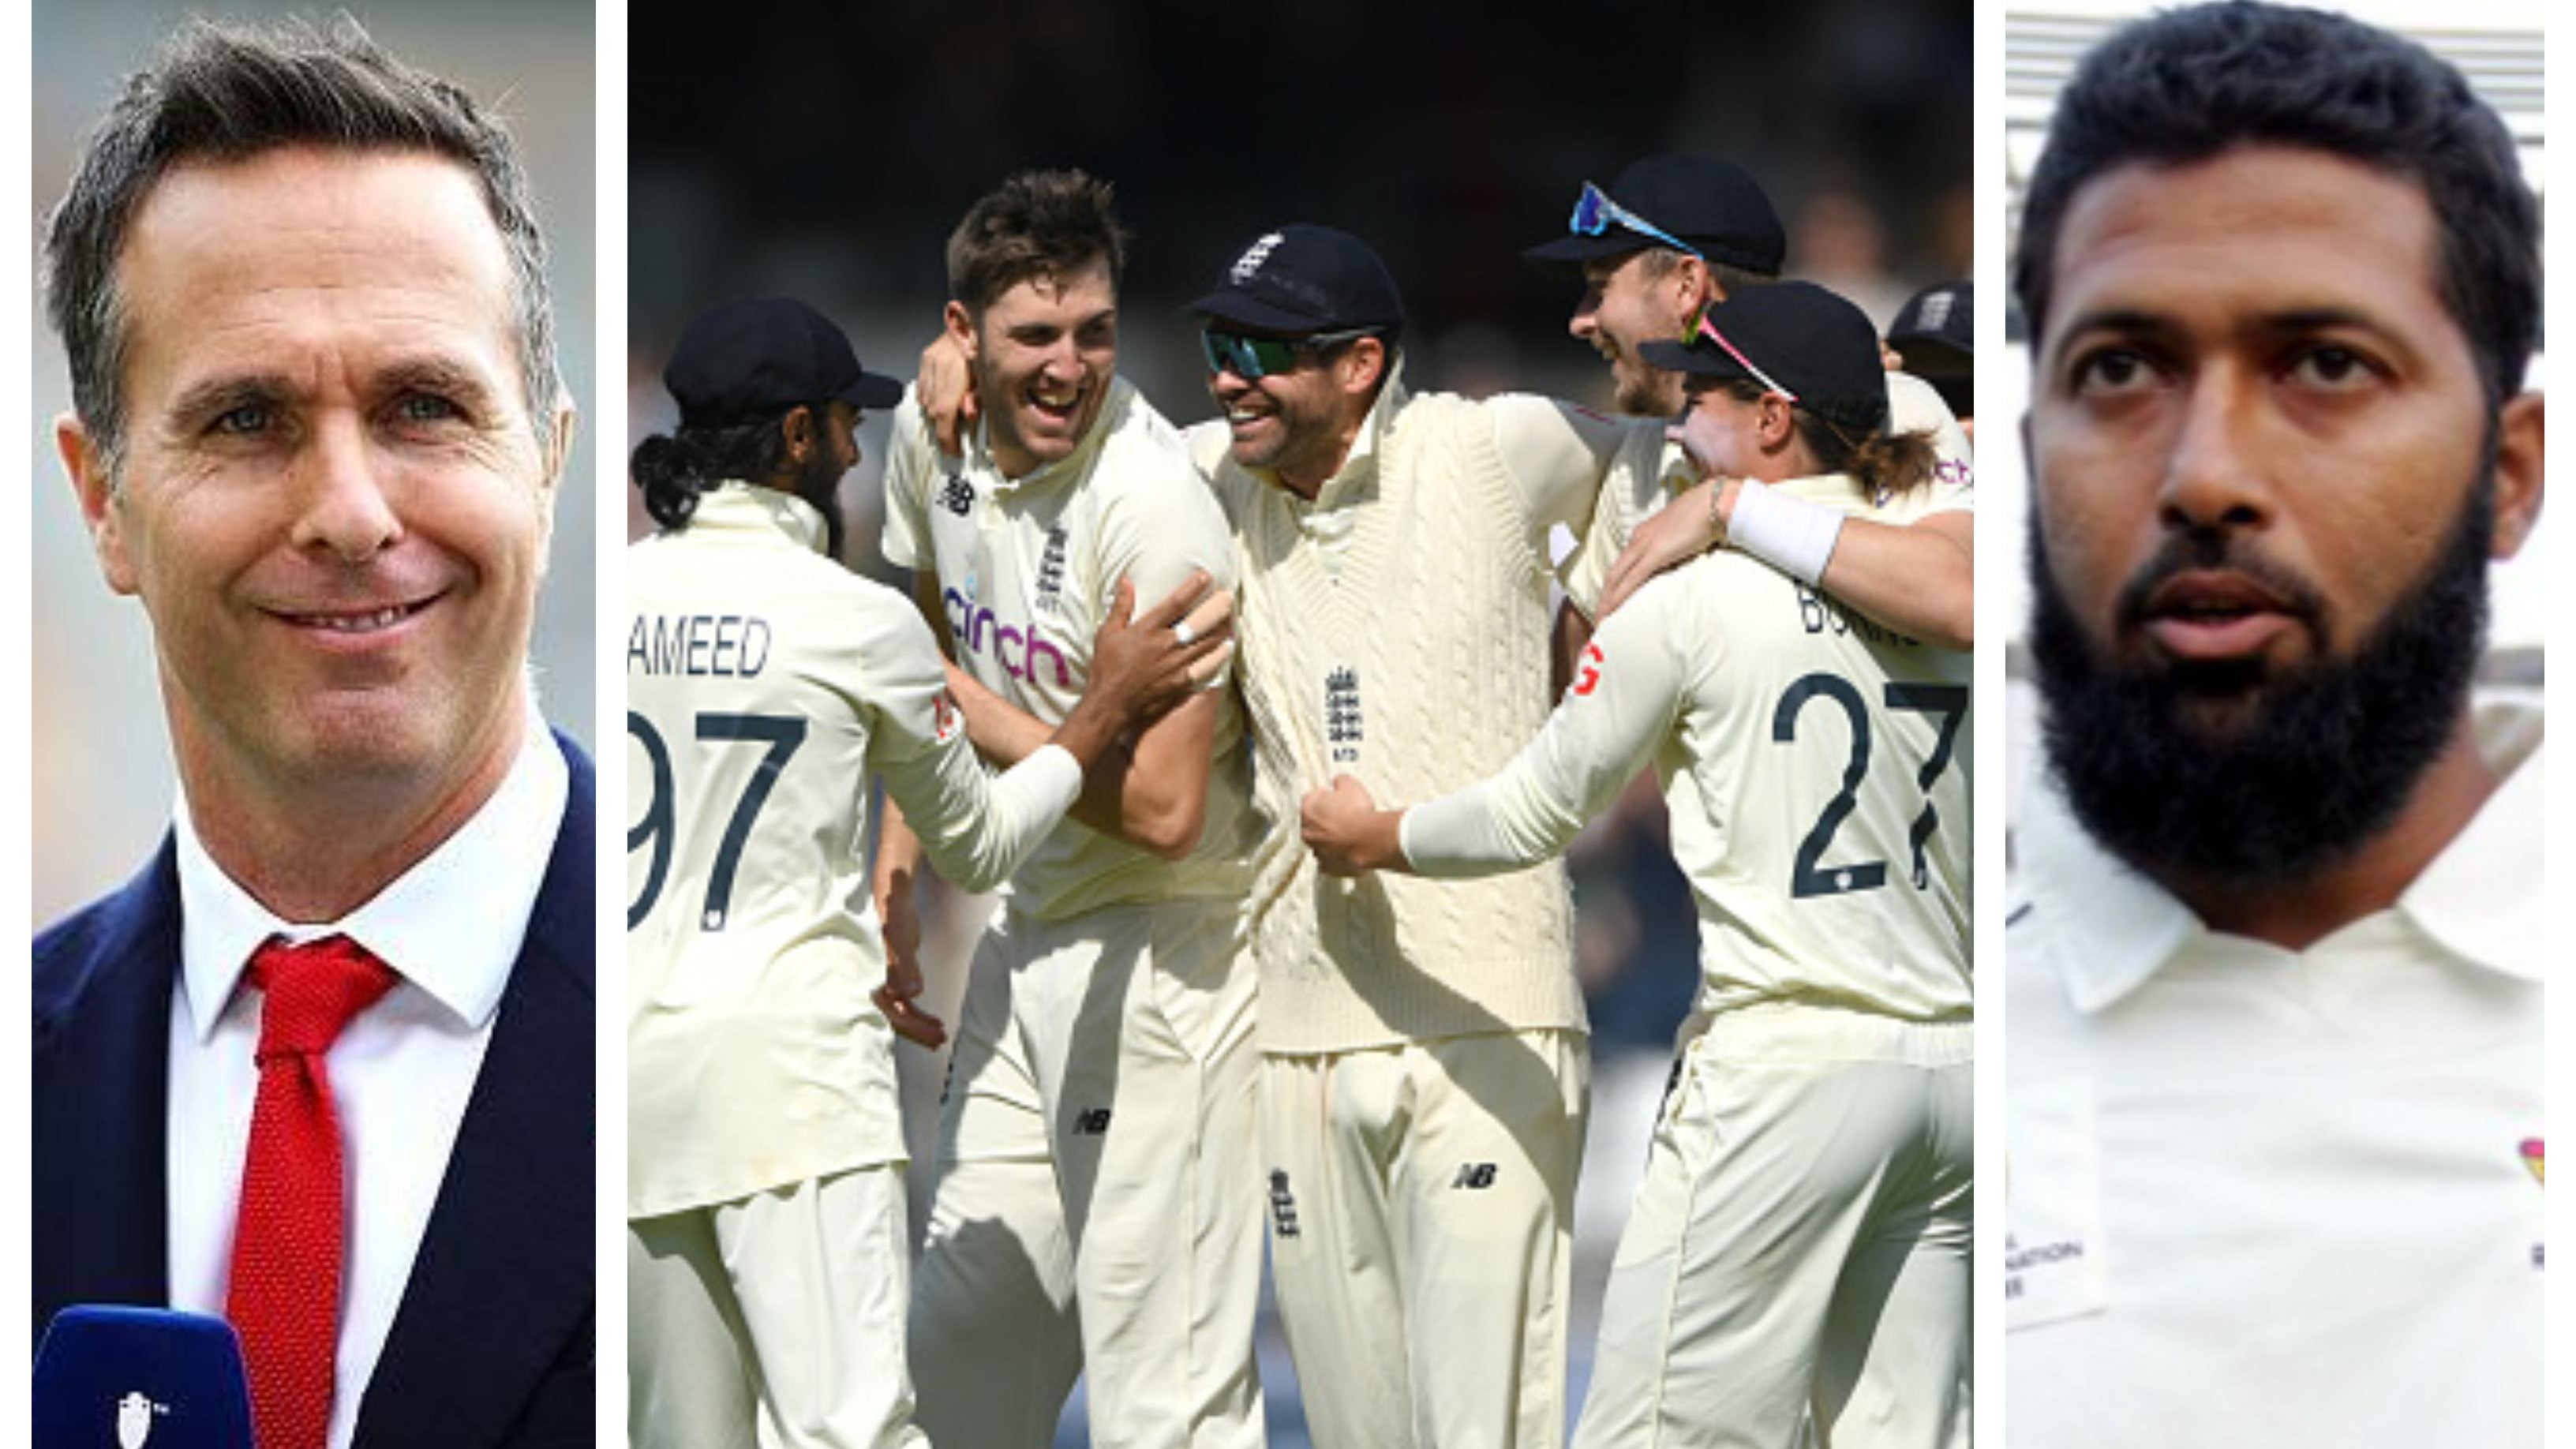 ENG v IND 2021: Cricket fraternity reacts as England wrap India’s 2nd innings for 278 in Leeds to level the series 1-1